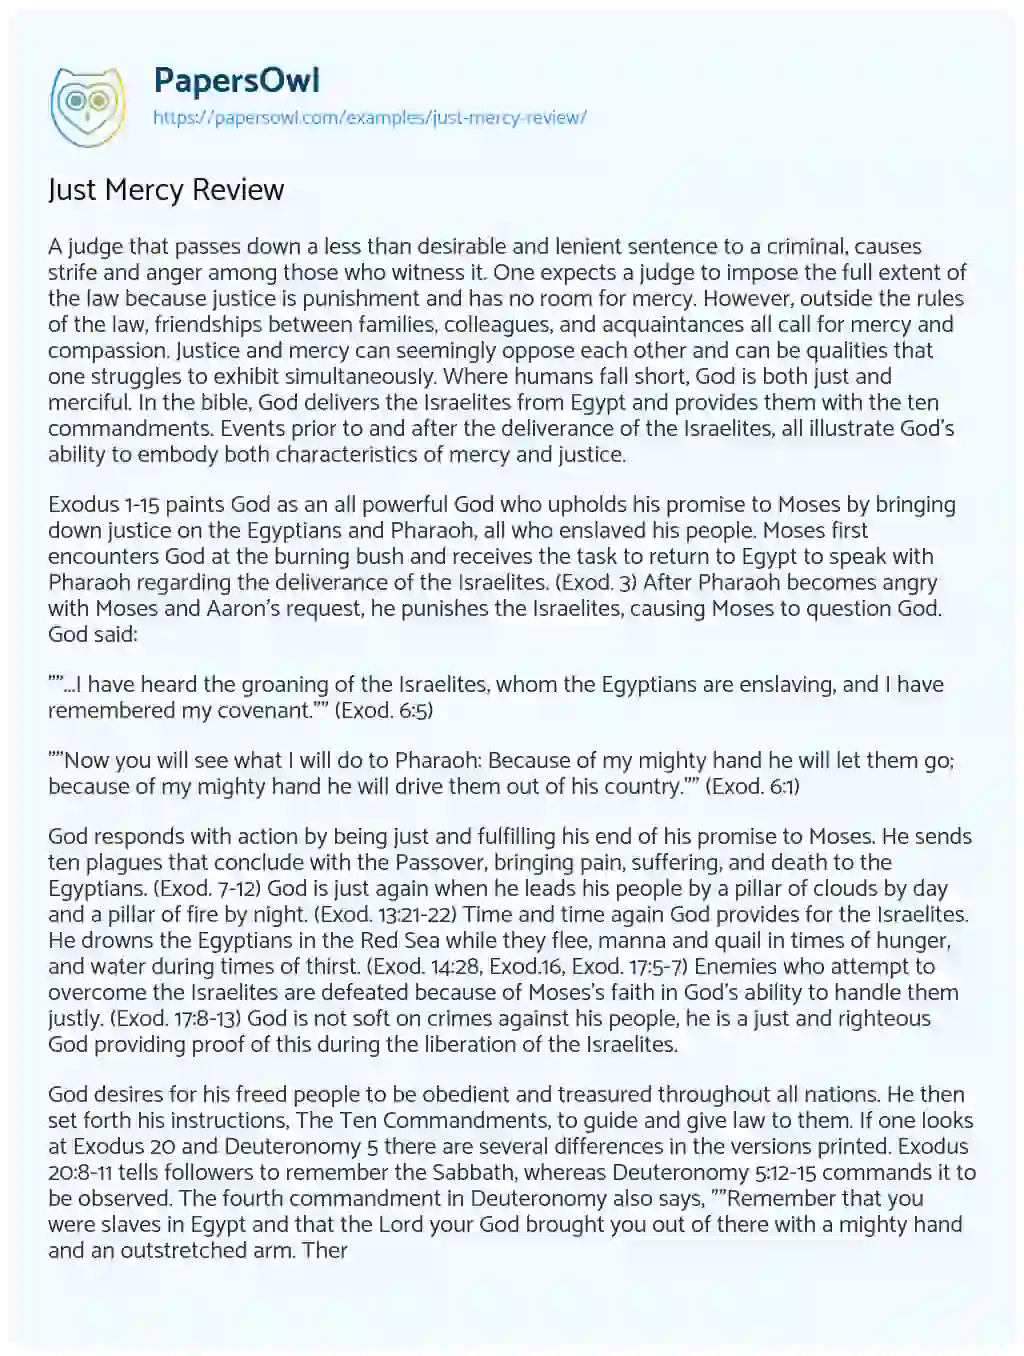 Essay on Just Mercy Review